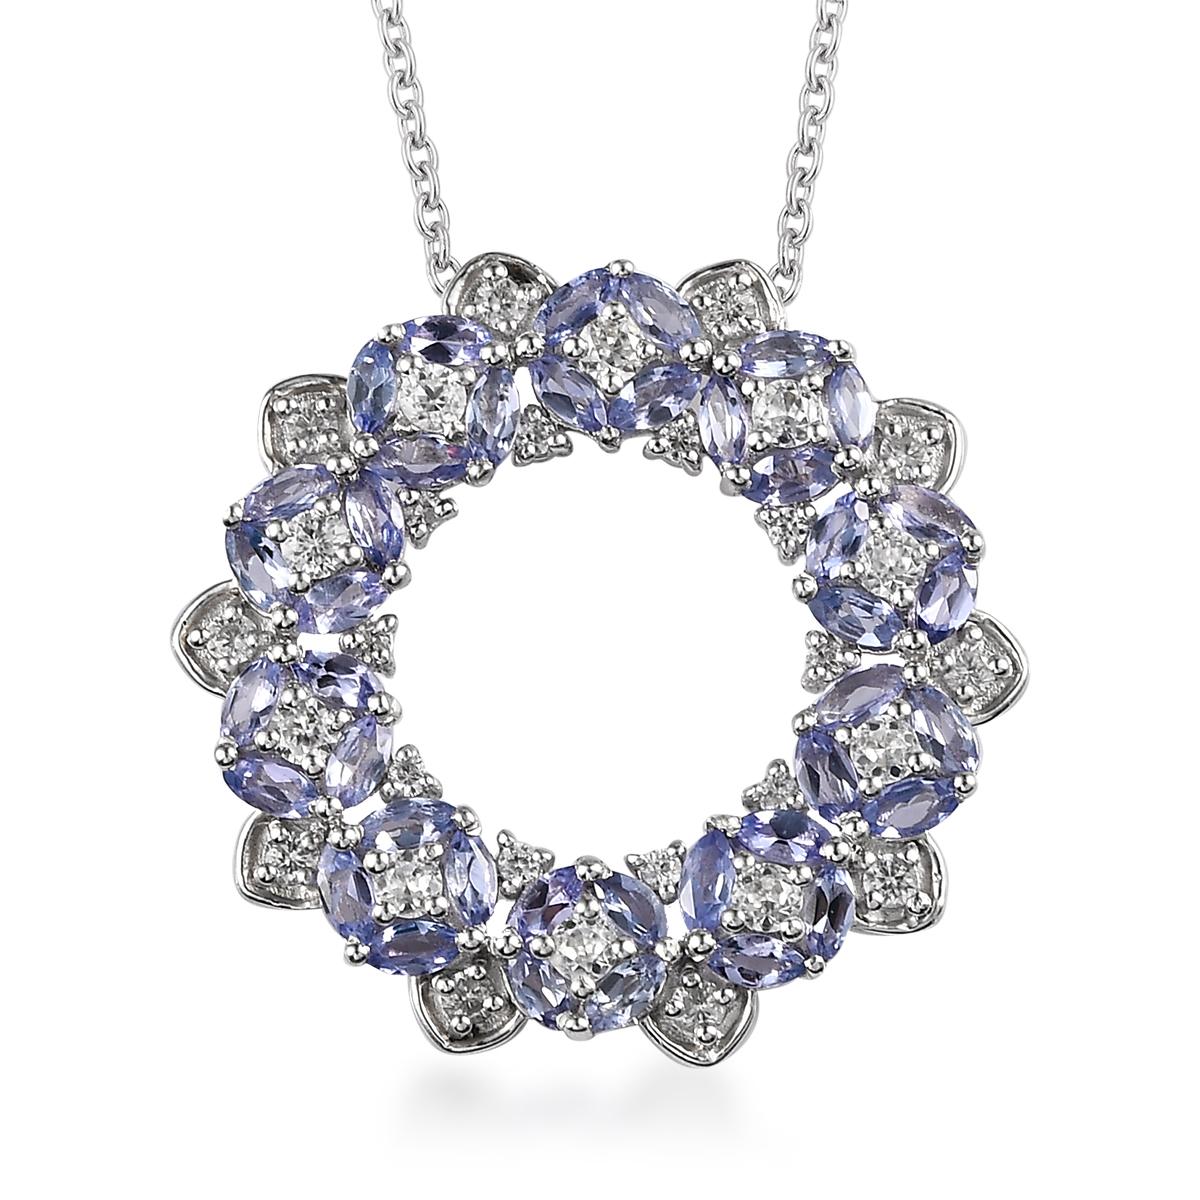 ★ PRODUCT DETAILS ★
• SKU - BSG-P-09
• Product – Necklace
• Metal - Sterling Silver
• Metal Purity - 925
• Necklace Length  - 22 Inch''

★ STONE DETAILS ★
• Stone Name - Tanzanite, Zircon 
• Stone Size – 4x2mm, 1.5
• Stone Weight – 5.24 CTS
• Stone